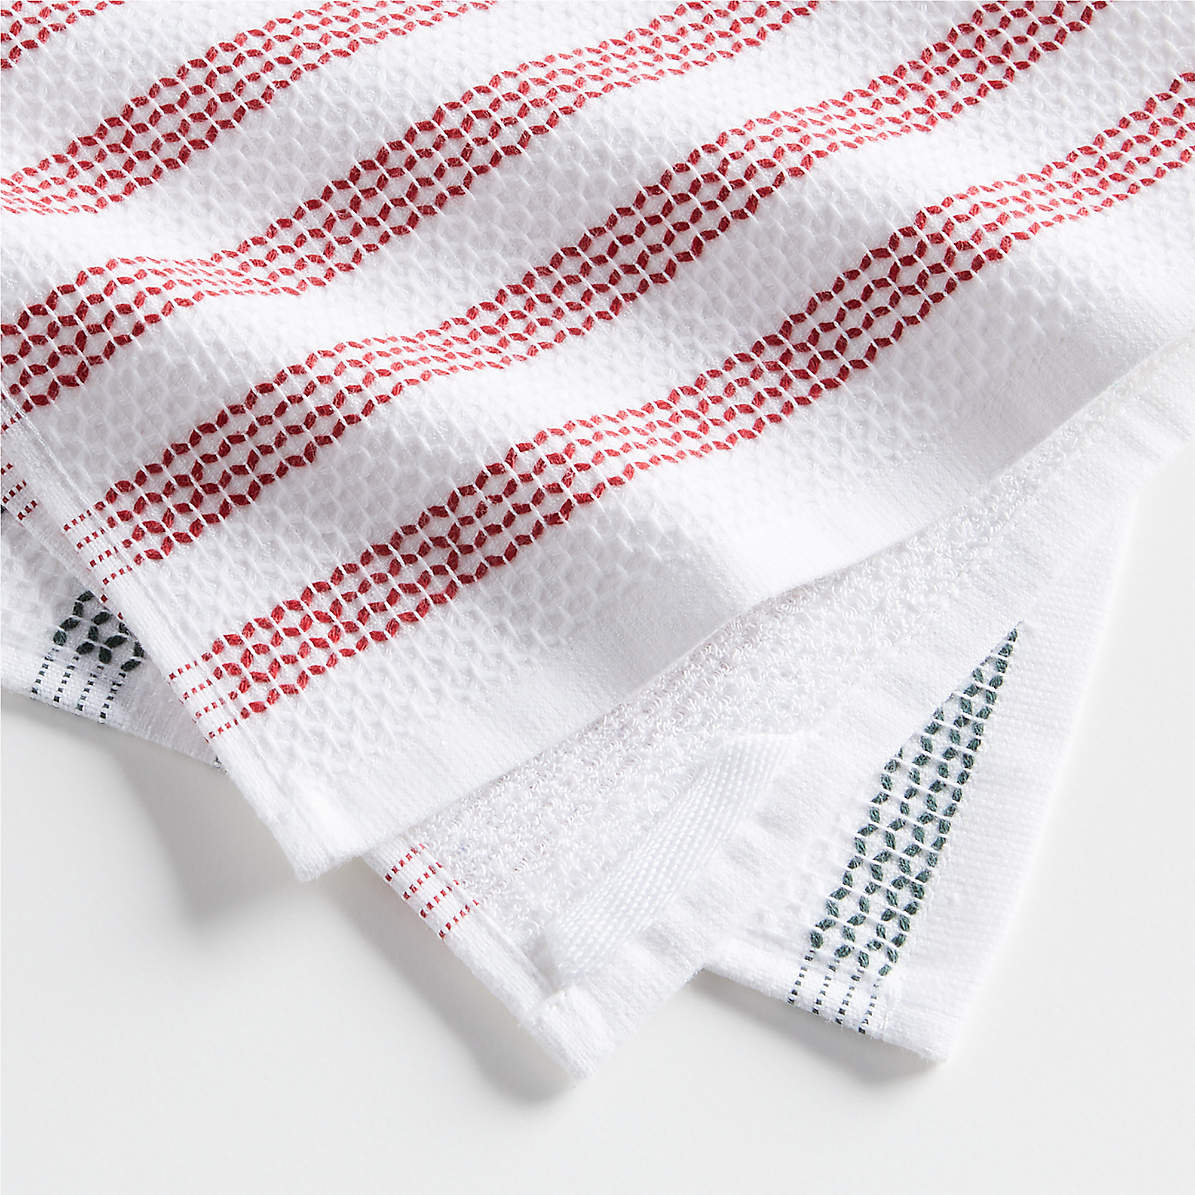 PPAXL Cotton Dish Towels for Kitchen, Terry Dish Cloths for Washing Dishes,  12